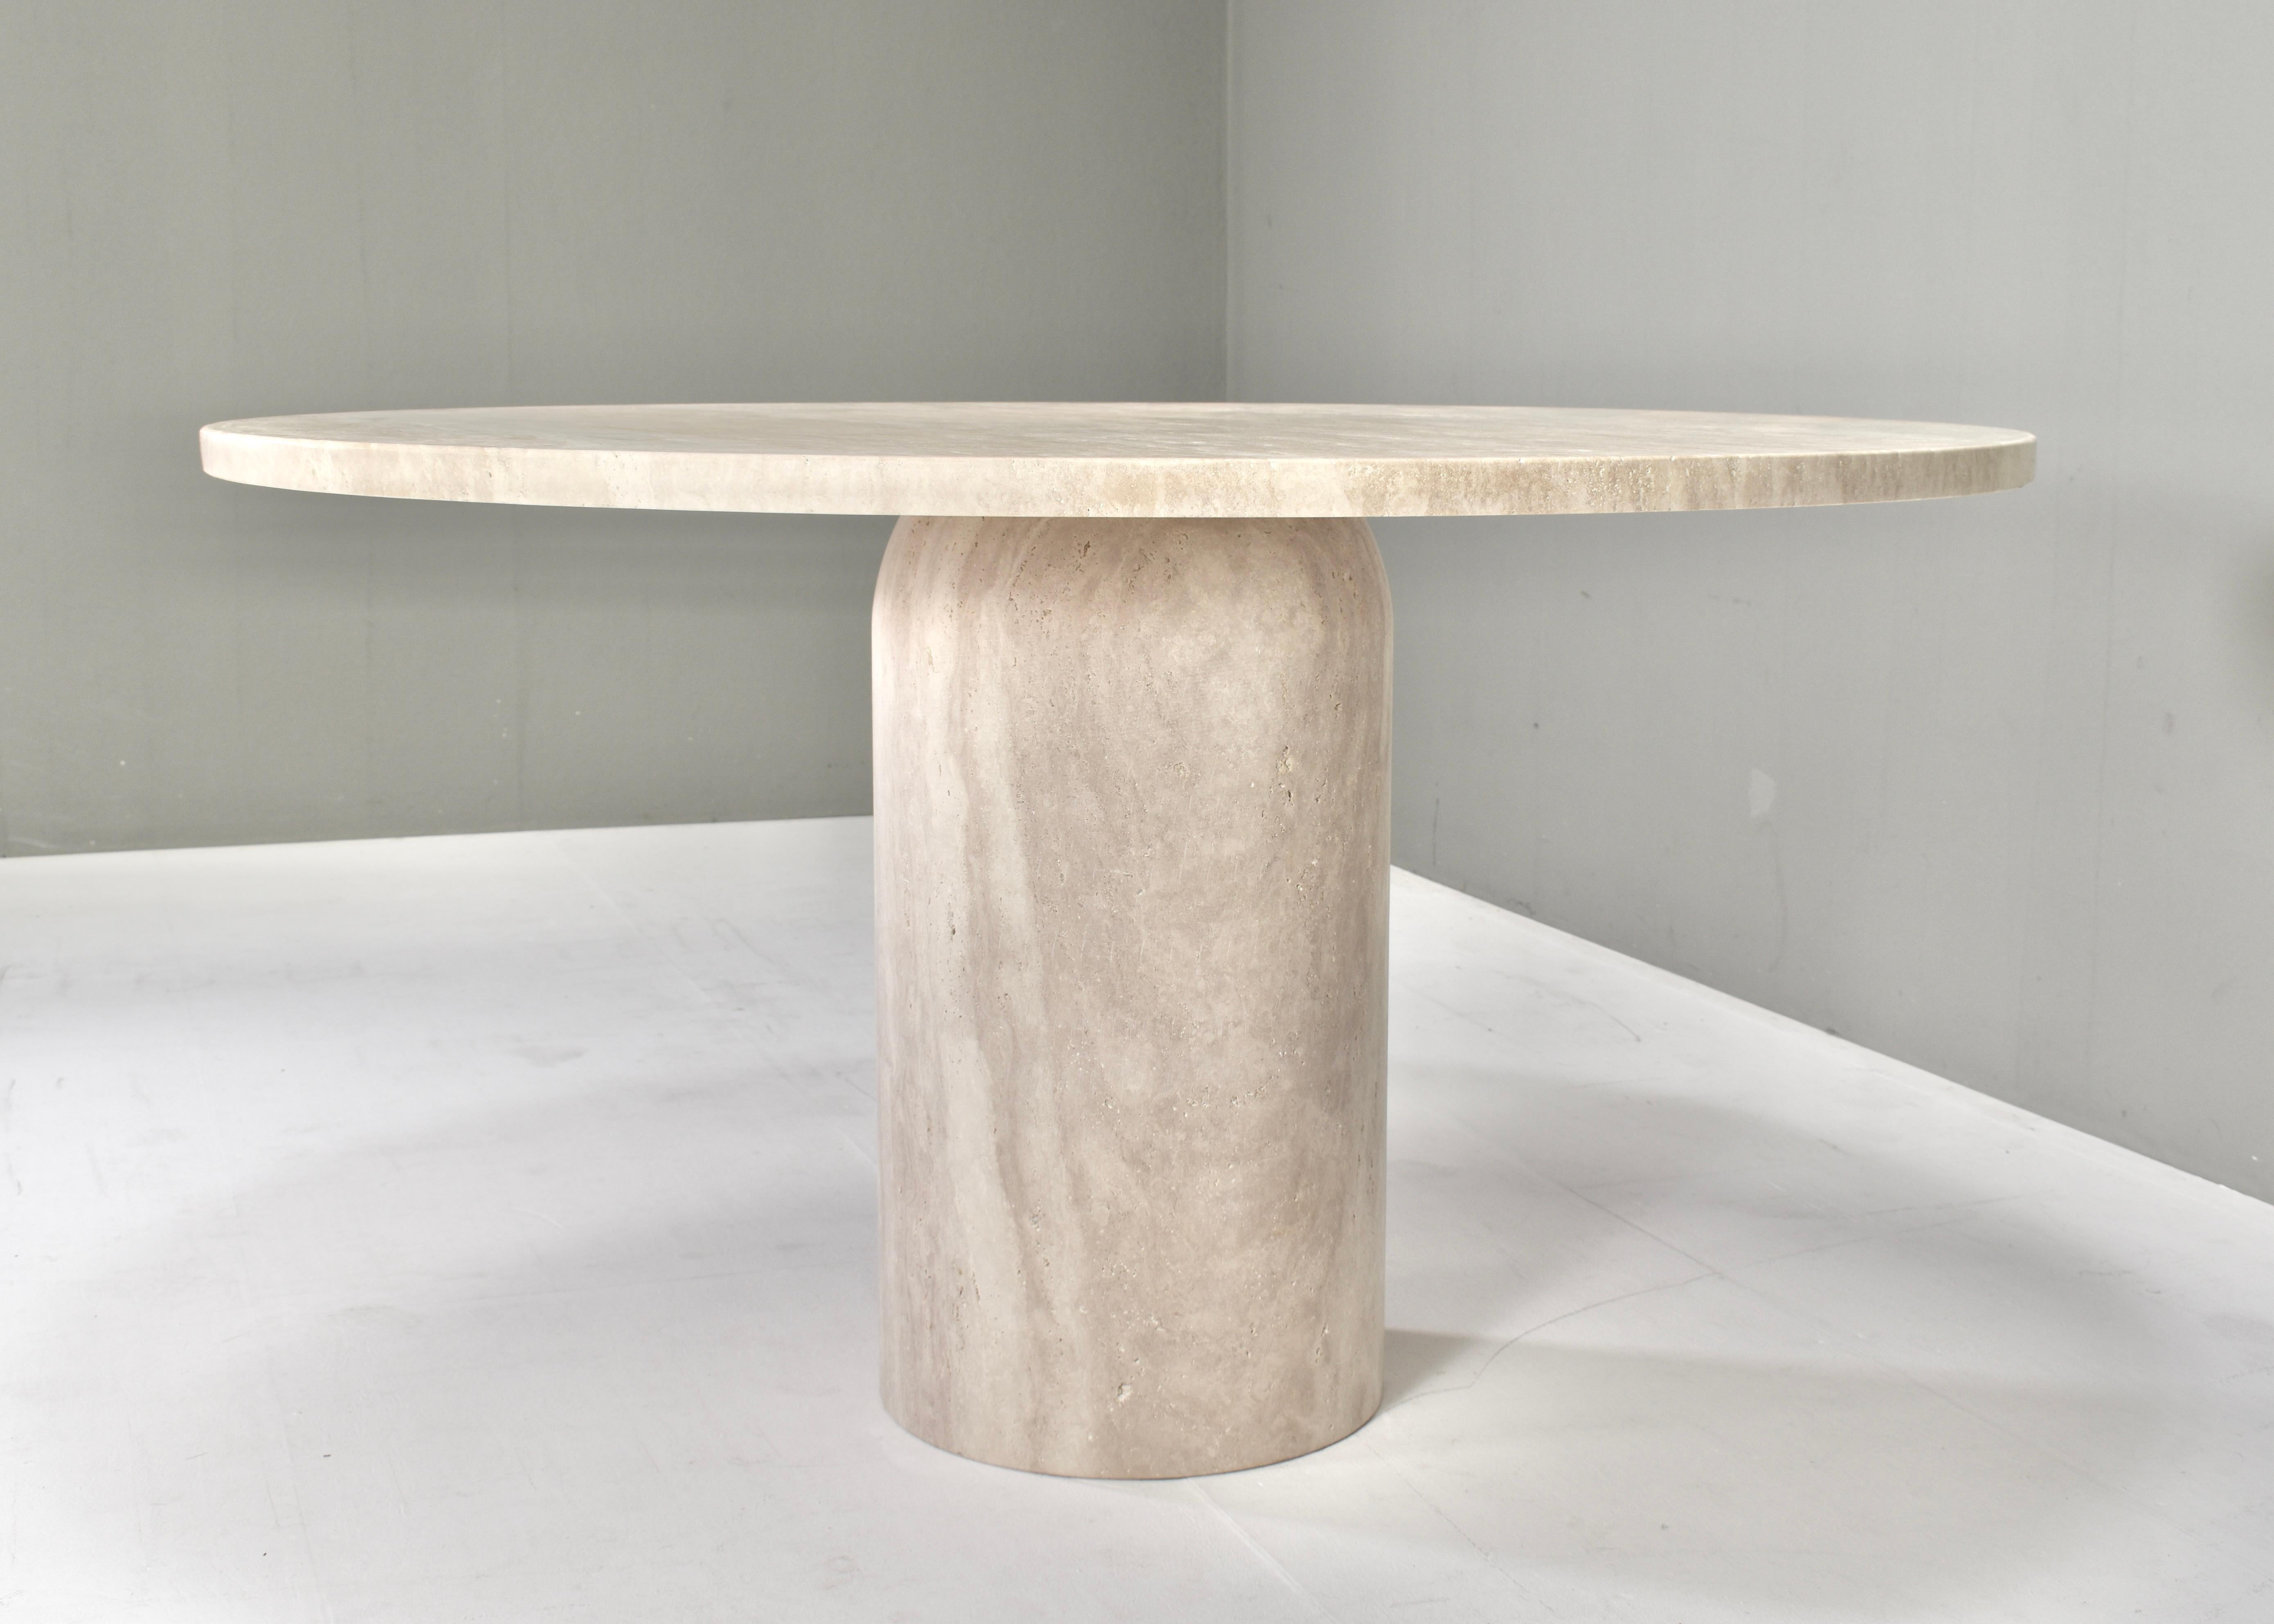 Introducing this exquisite Round Travertine Dining Table – Elegance in the Manor of Up&Up, Angelo Mangiarotti and Kelly Wearstler.
Designer: in the manor of Kelly Wearstler
Manufacturer: in the manor of Up&Up 
Model: round dining table
Design